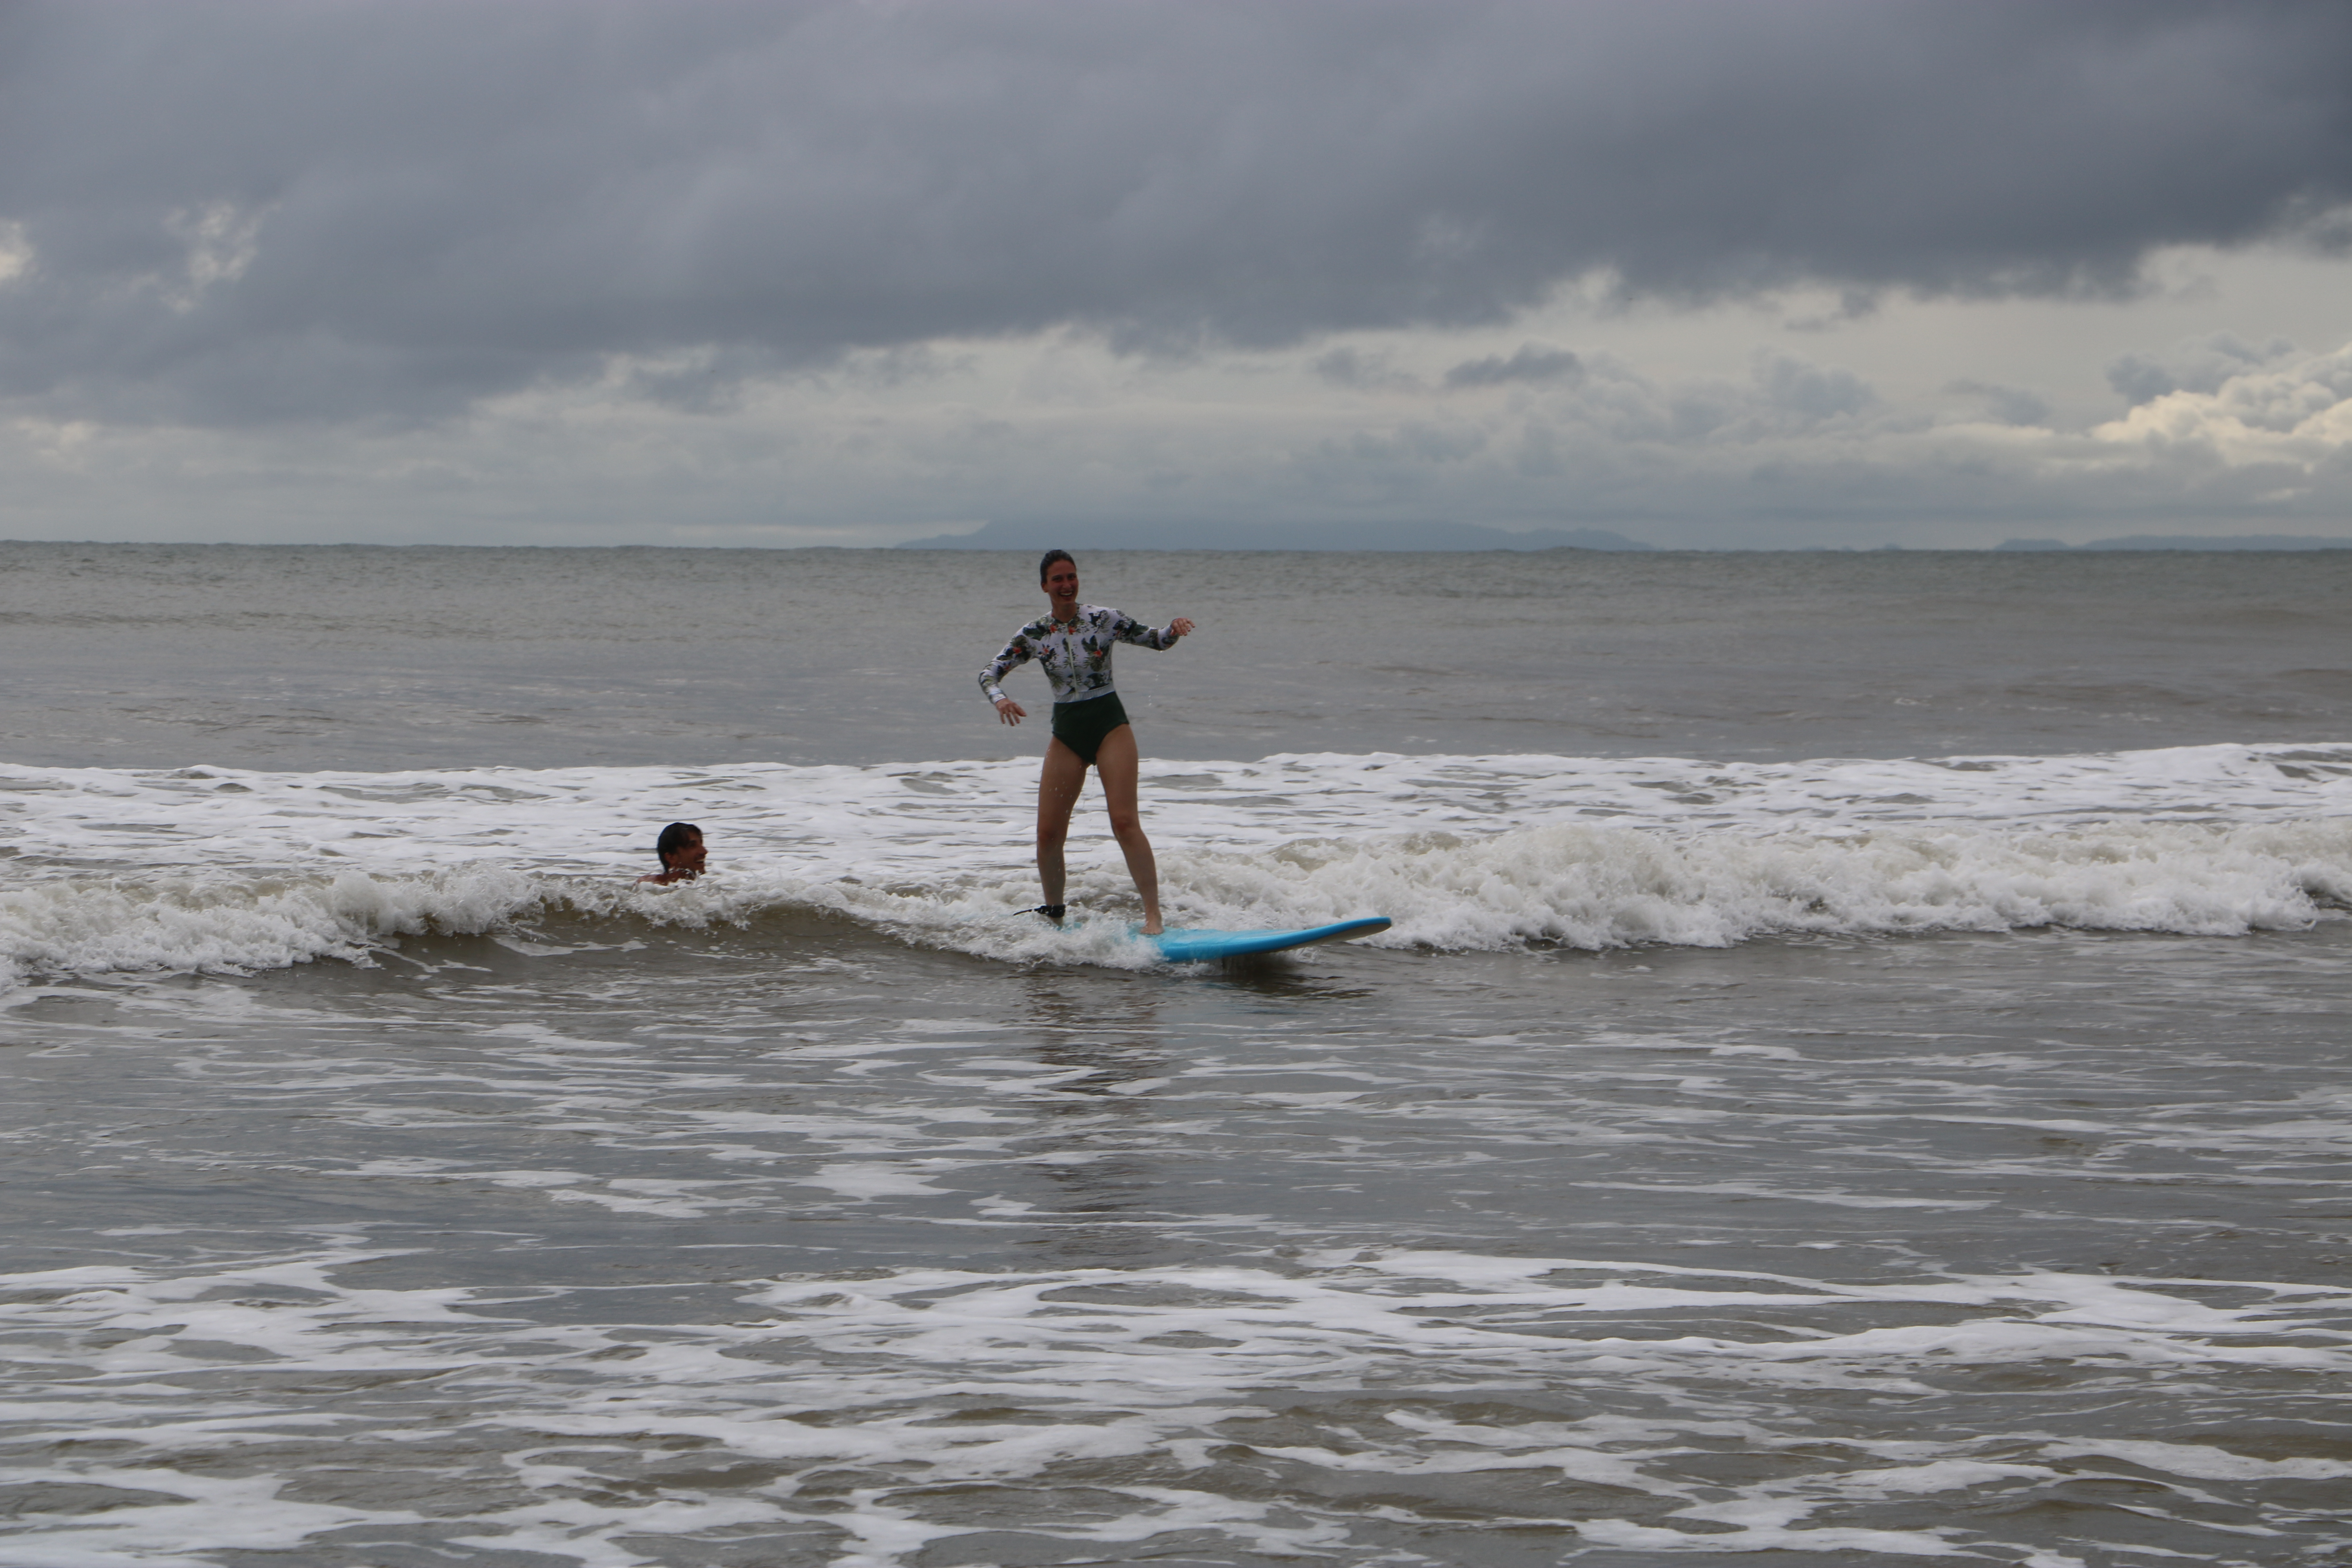 Take beginner lessons at Room2Board surf camp